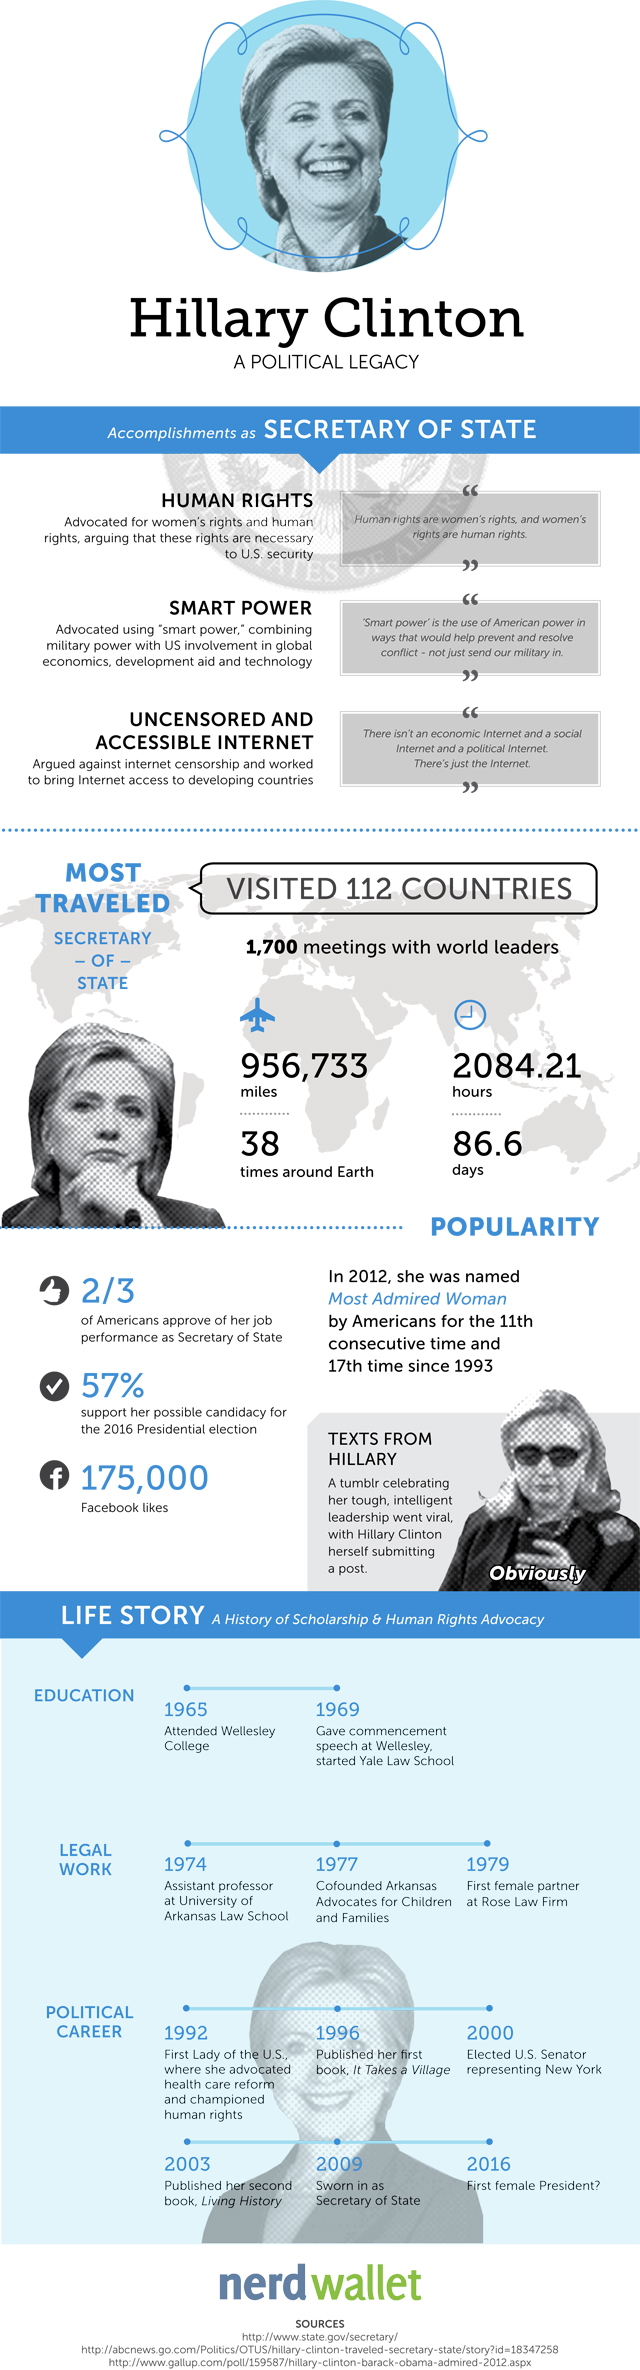 Hillary Clinton 2016-Infographic